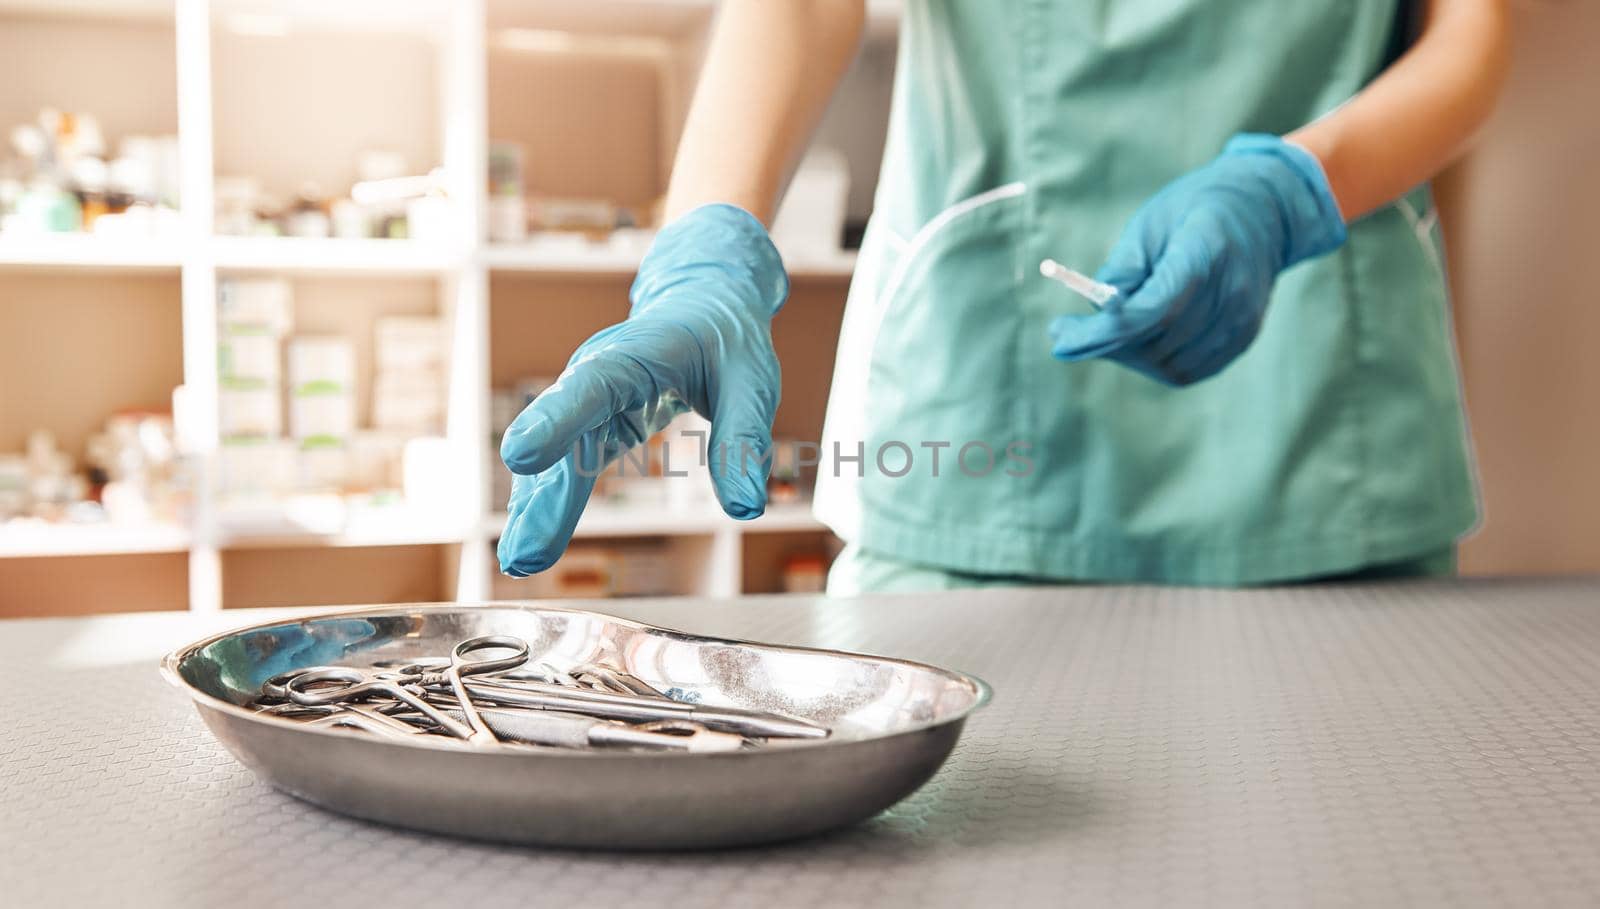 Choosing right tool. Vet hands in protective gloves taking metal tools for work with patient in the veterinary clinic. Medicine concept. Animal hospital. Medical equipment